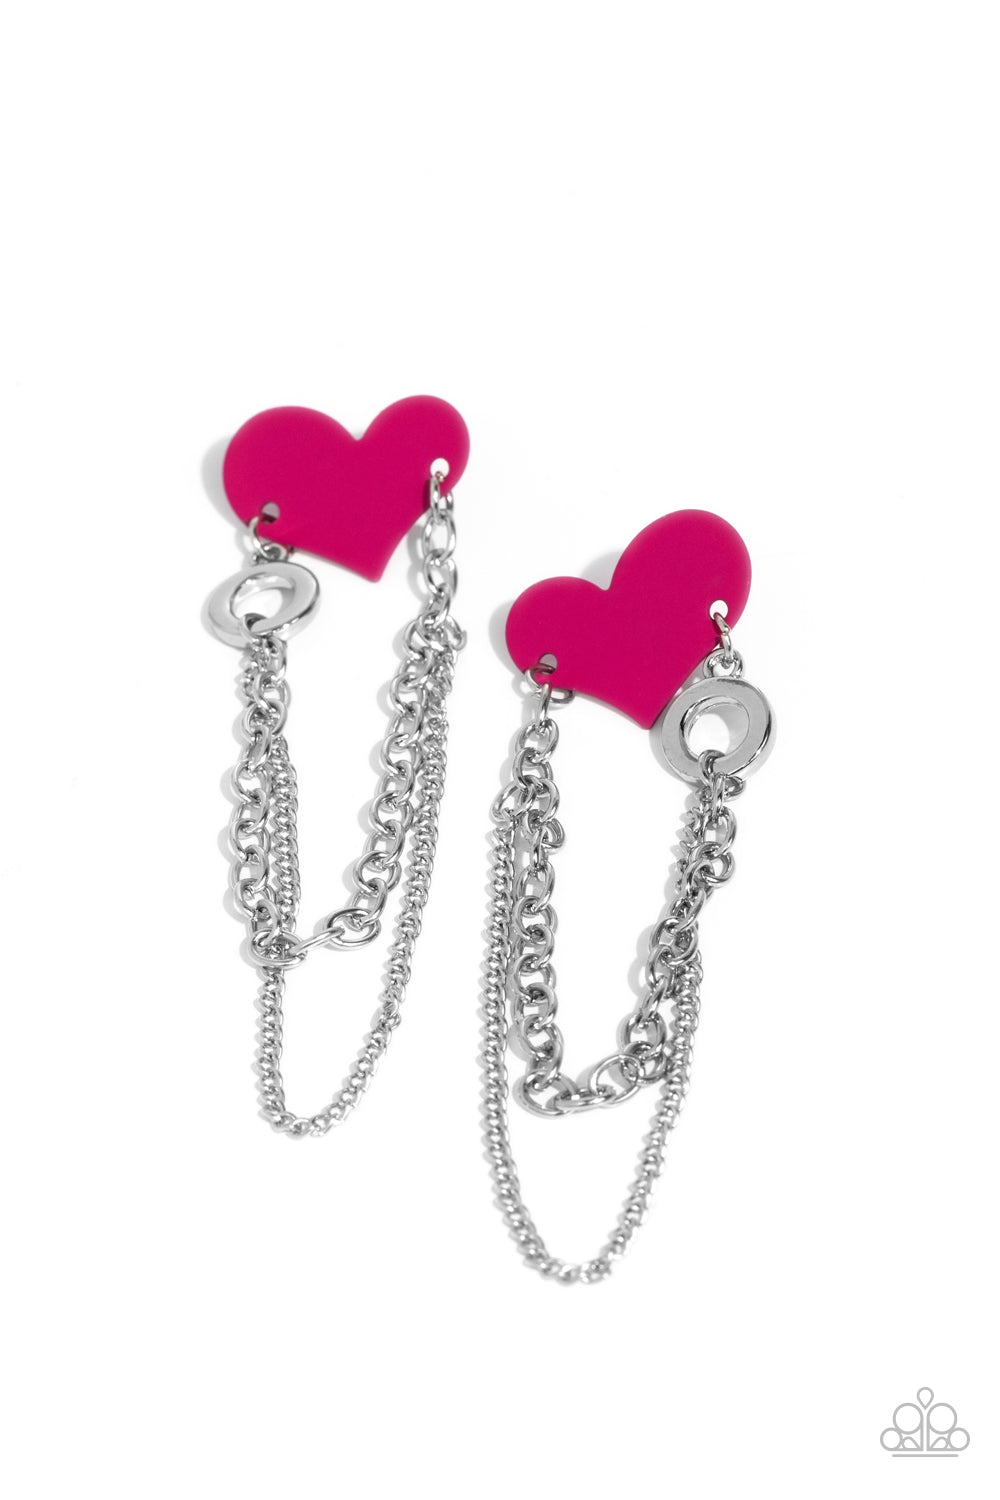 Strands of silver chains drape from a curvy Pink Peacock heart fixture, creating swaying movement from a vibrant, youthful finish. Earring attaches to a standard post fitting.  Sold as one pair of post earrings.